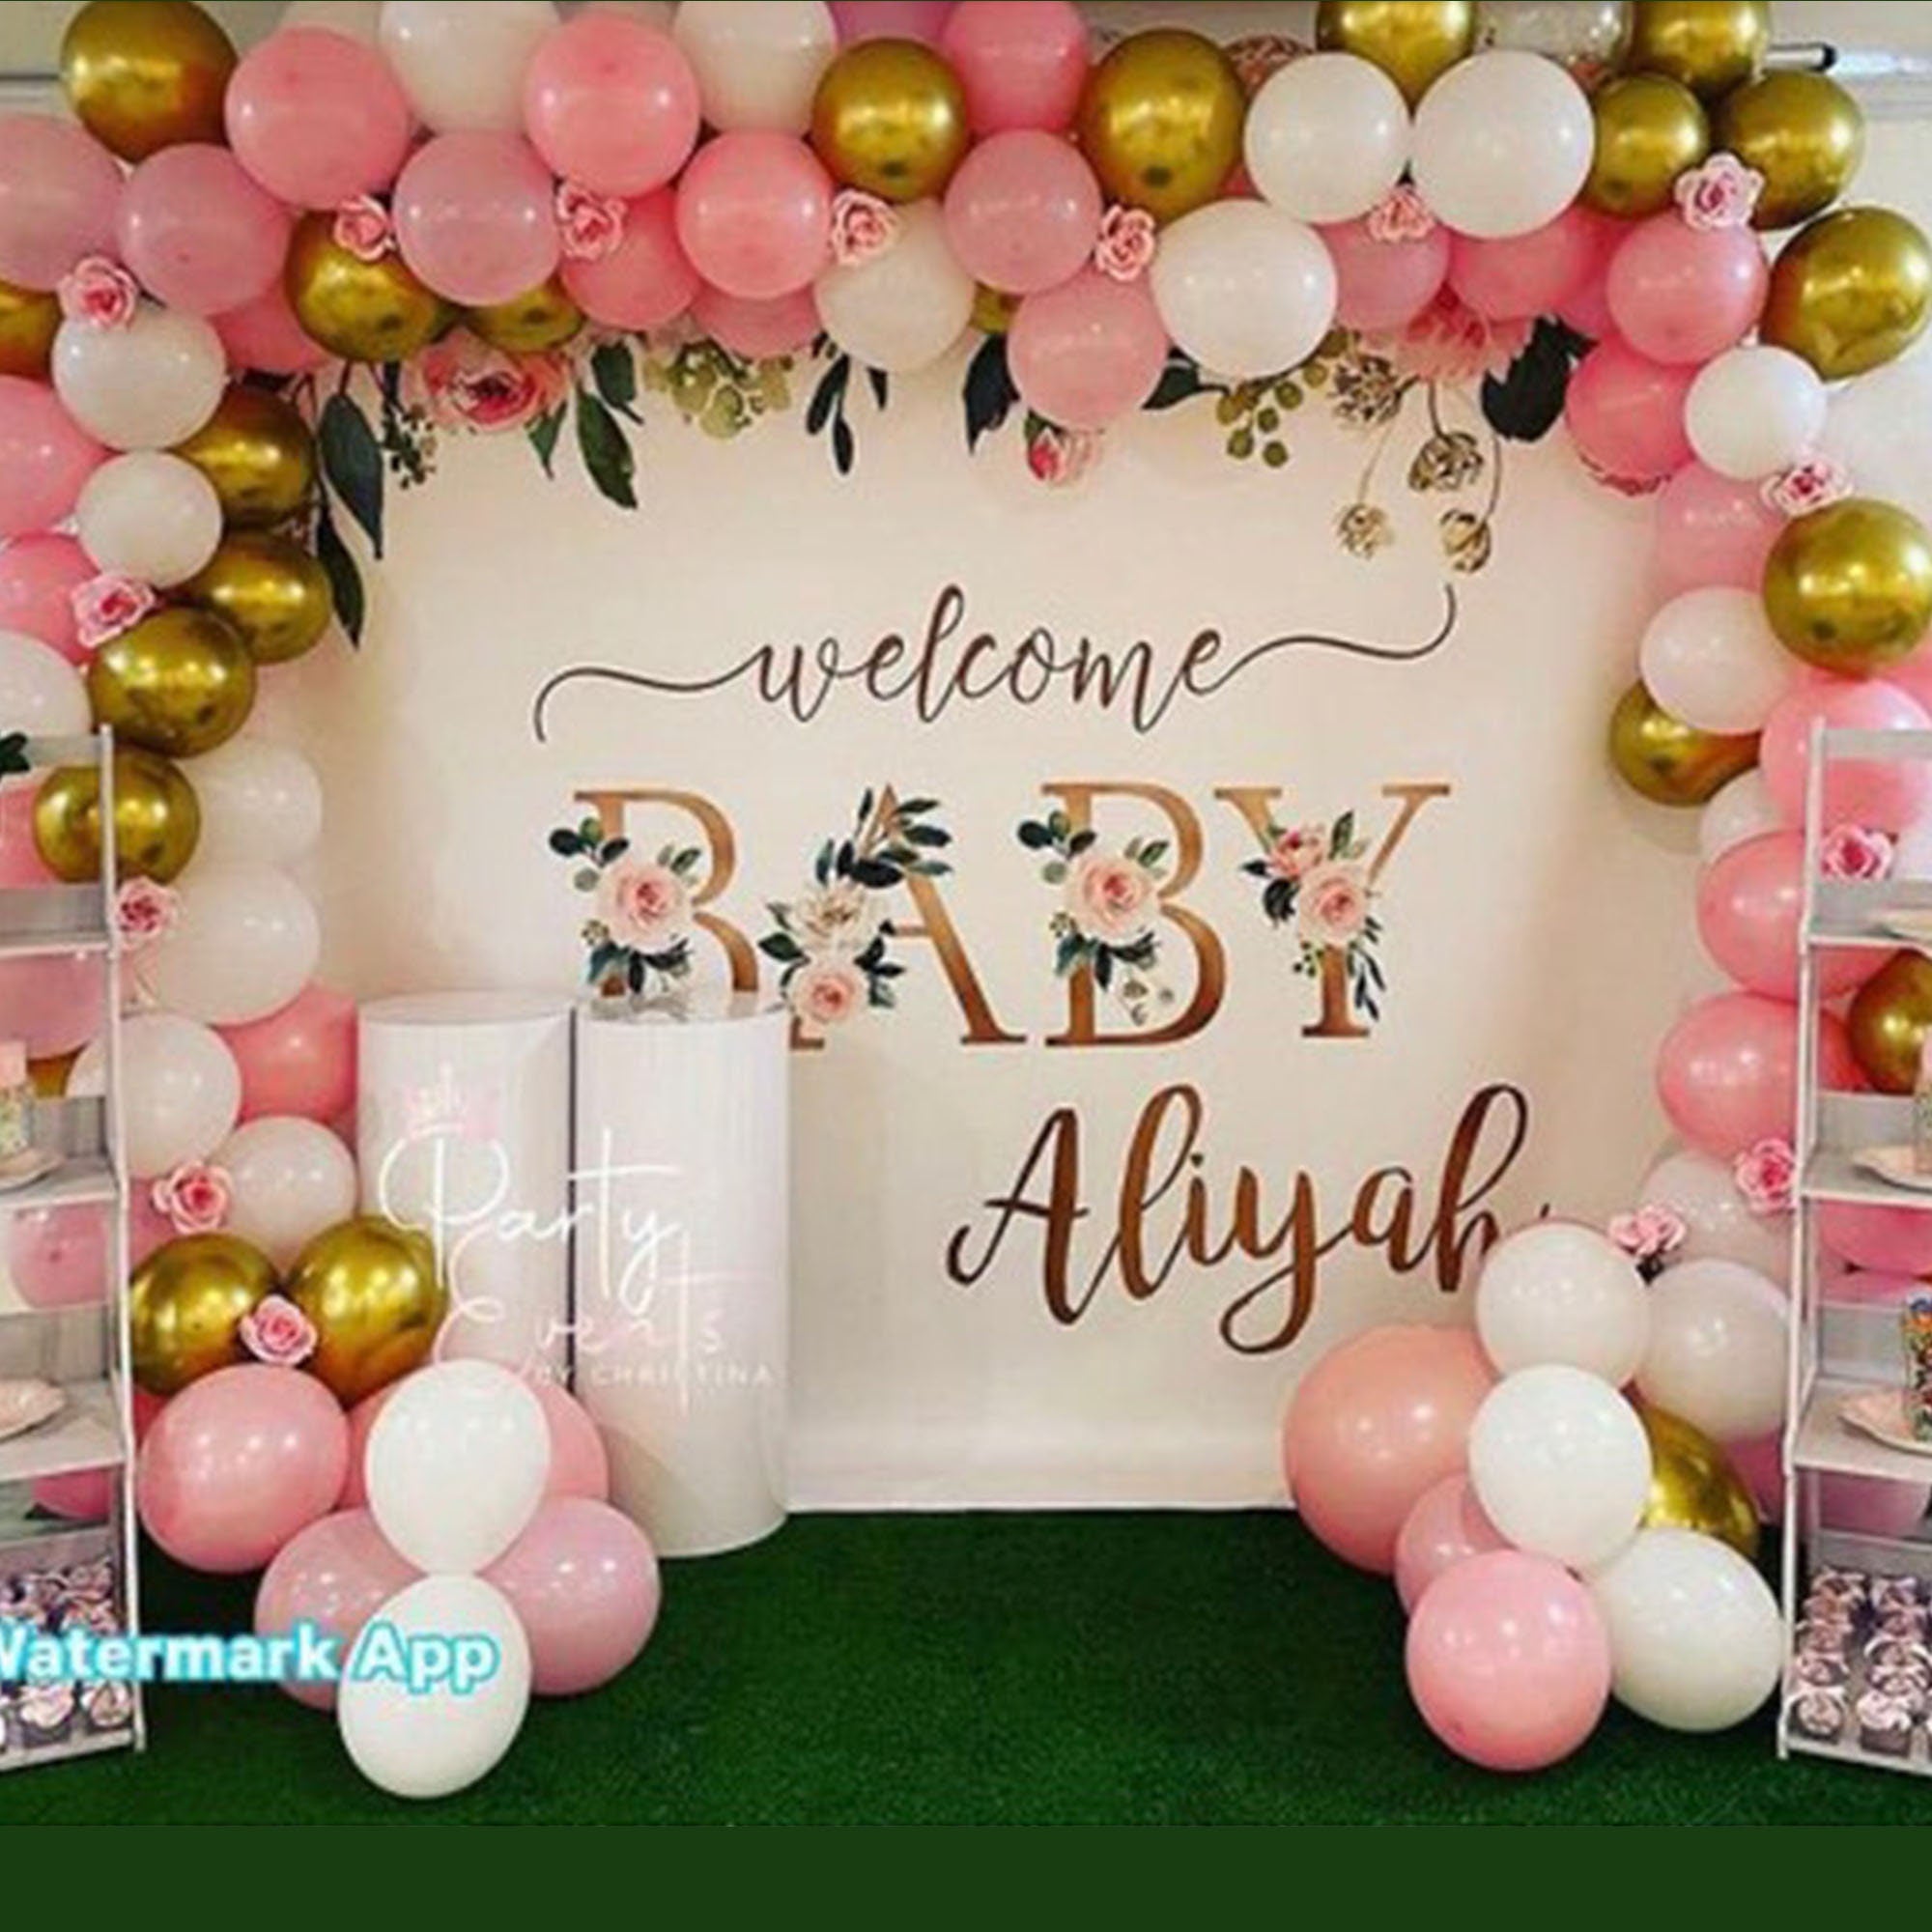 Baby Shower Backdrop Girl, Girl Baby Shower Decorations, Photo Booth Backdrop, Baby Shower Banner, Twins Shower 01BS07